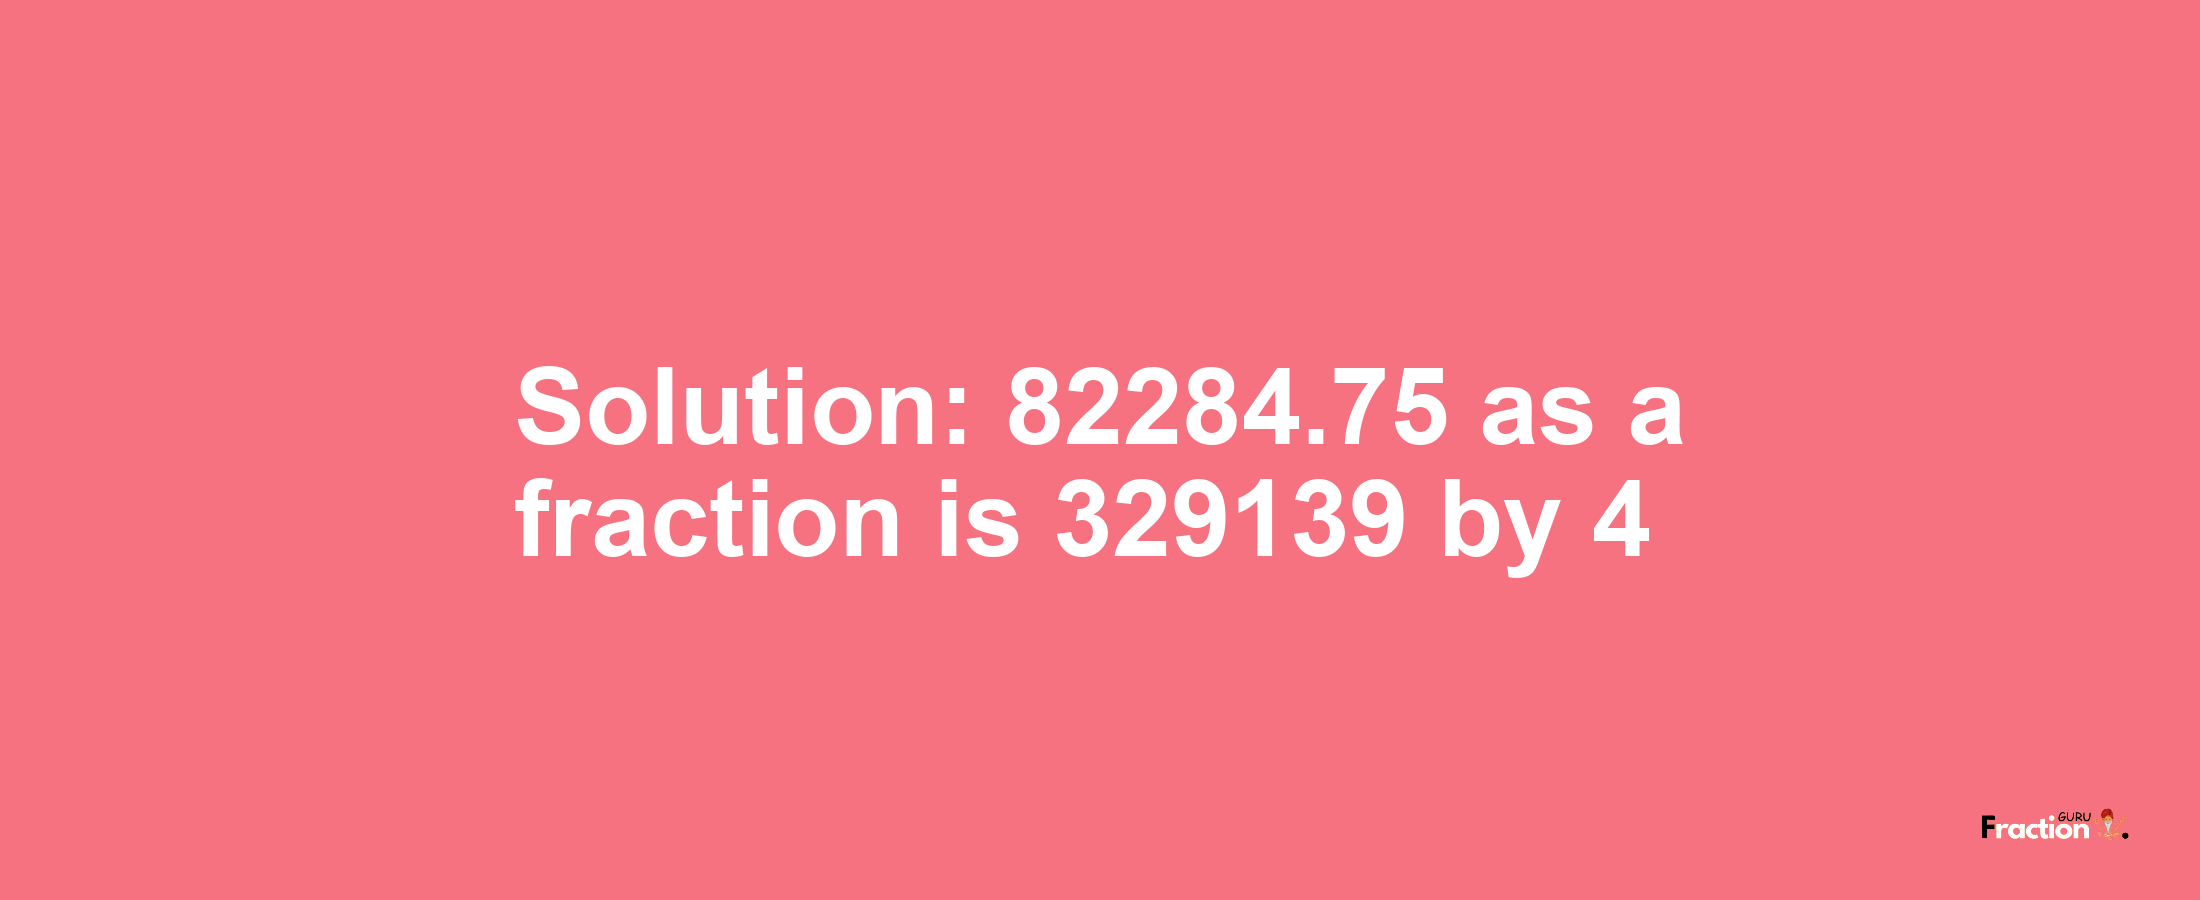 Solution:82284.75 as a fraction is 329139/4